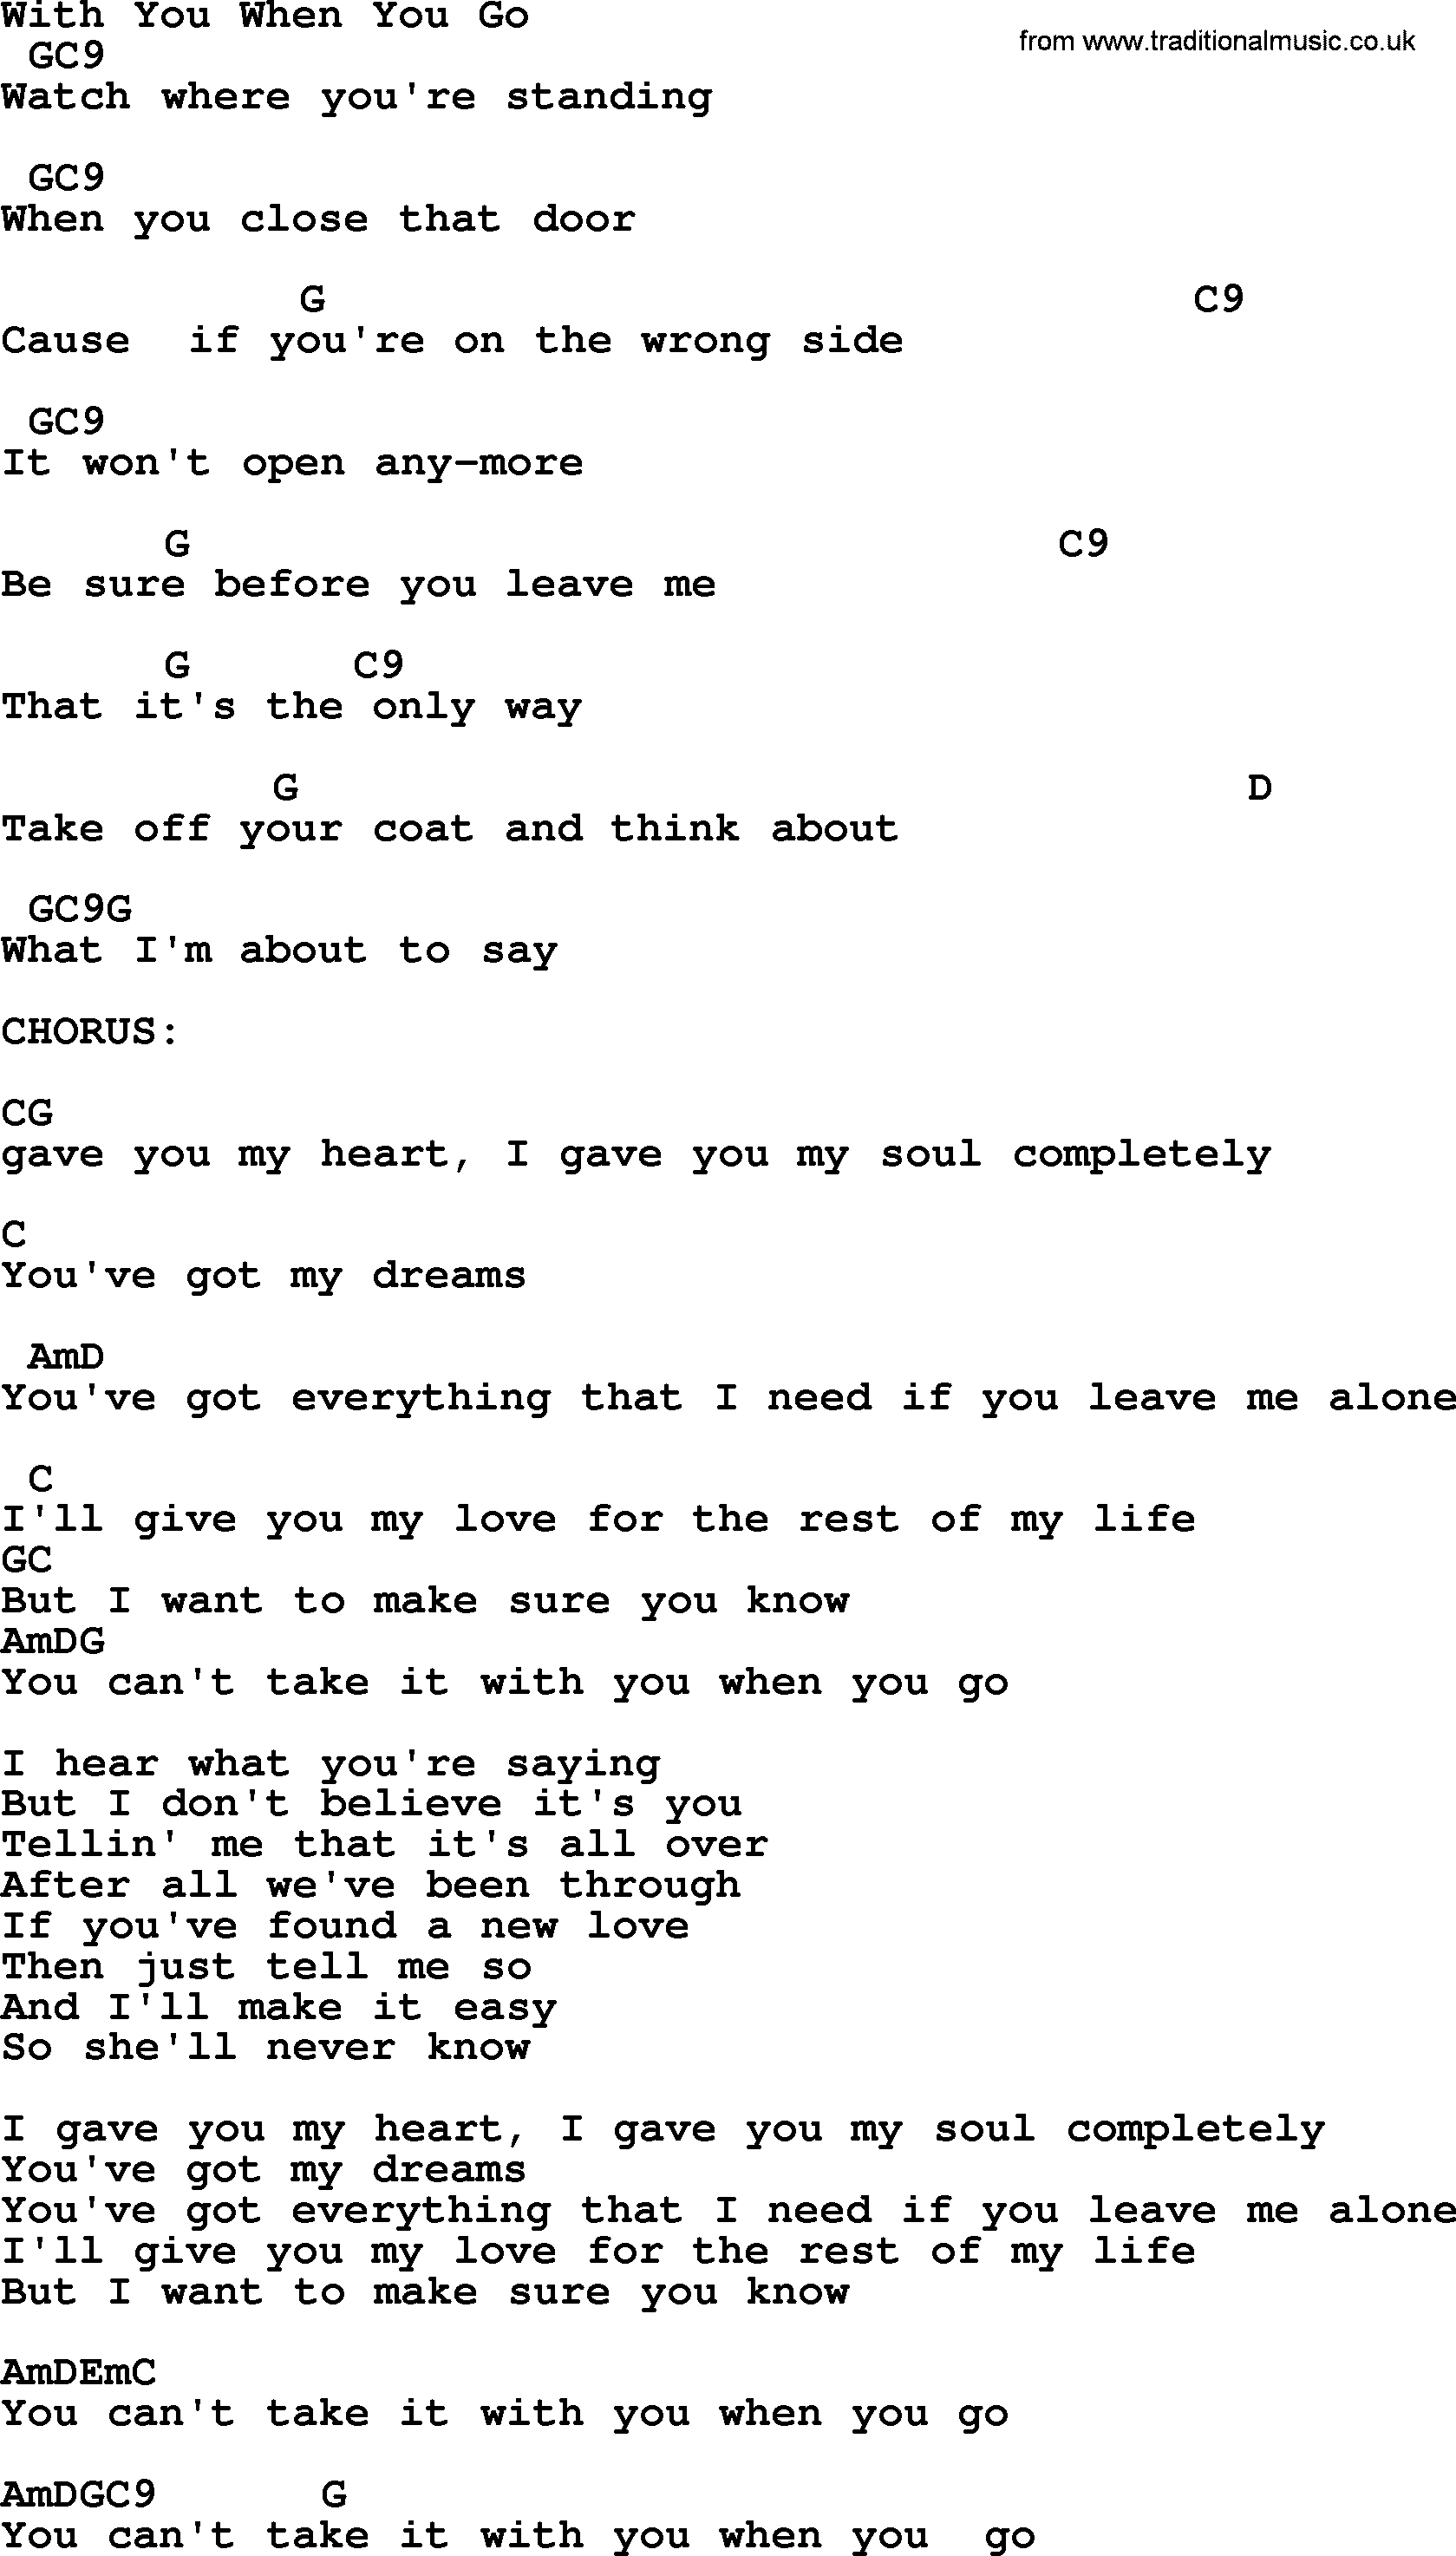 Bluegrass song: With You When You Go, lyrics and chords